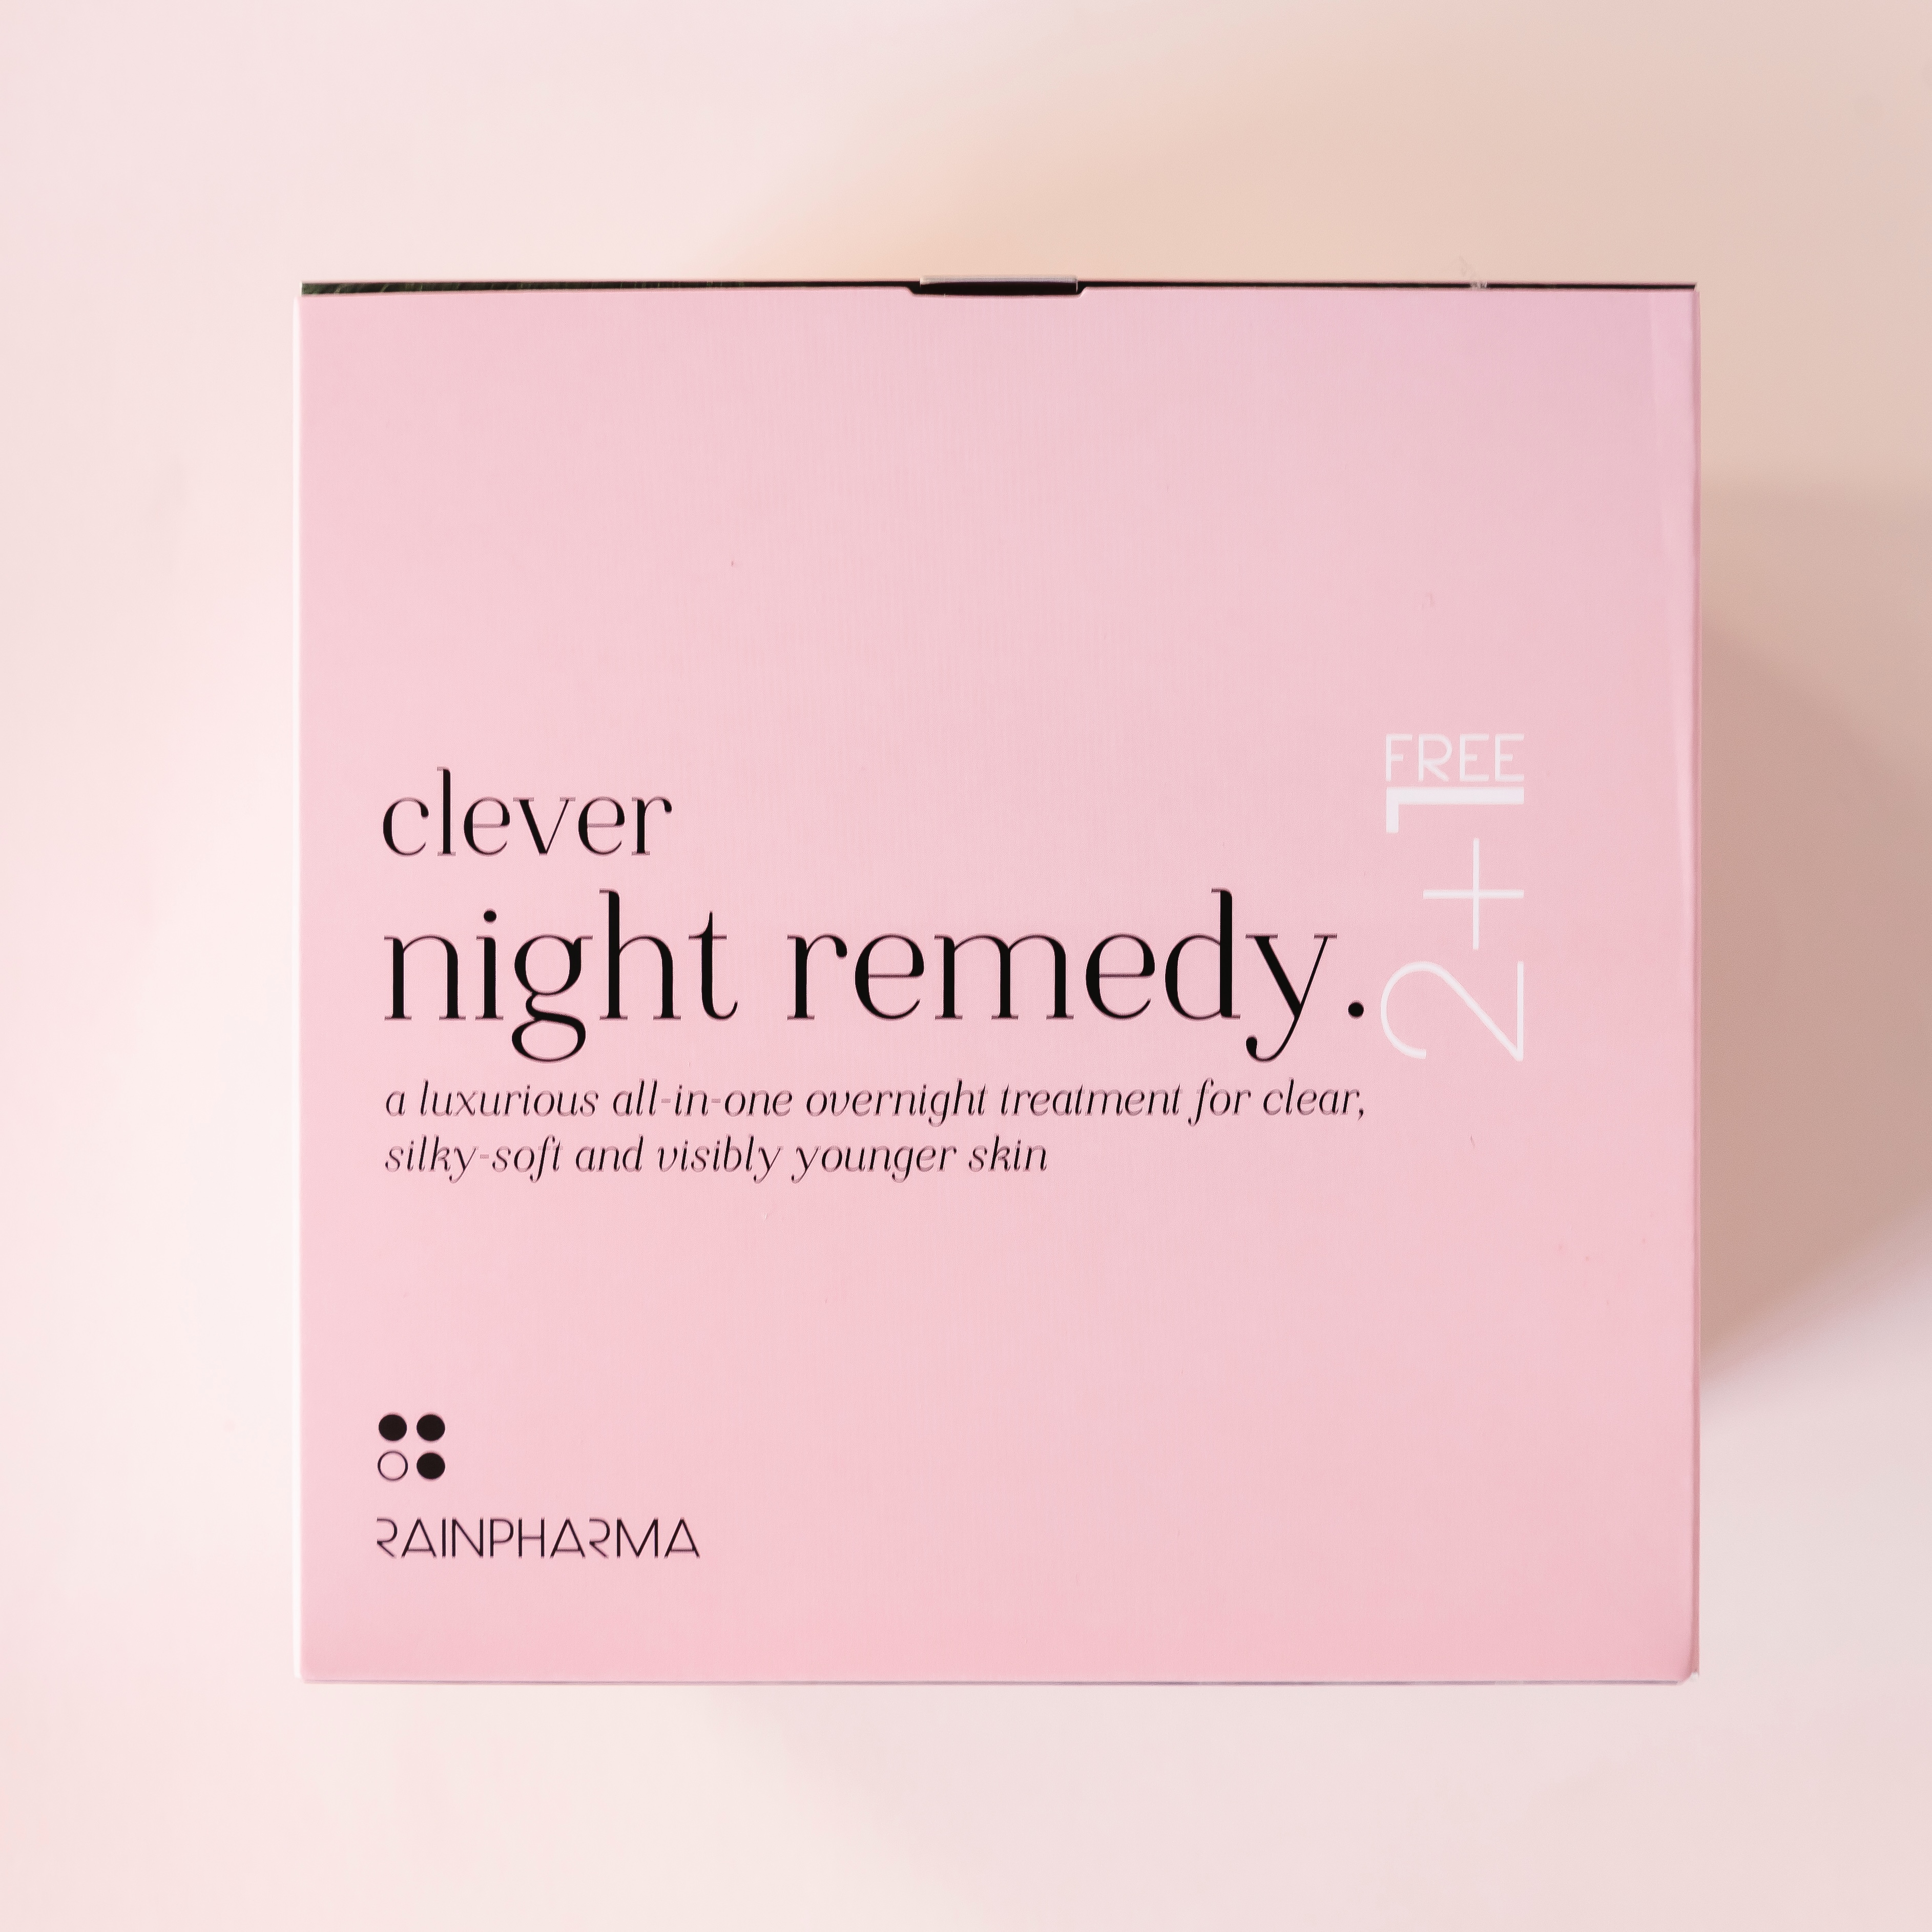 clever-night-remedy-21-free